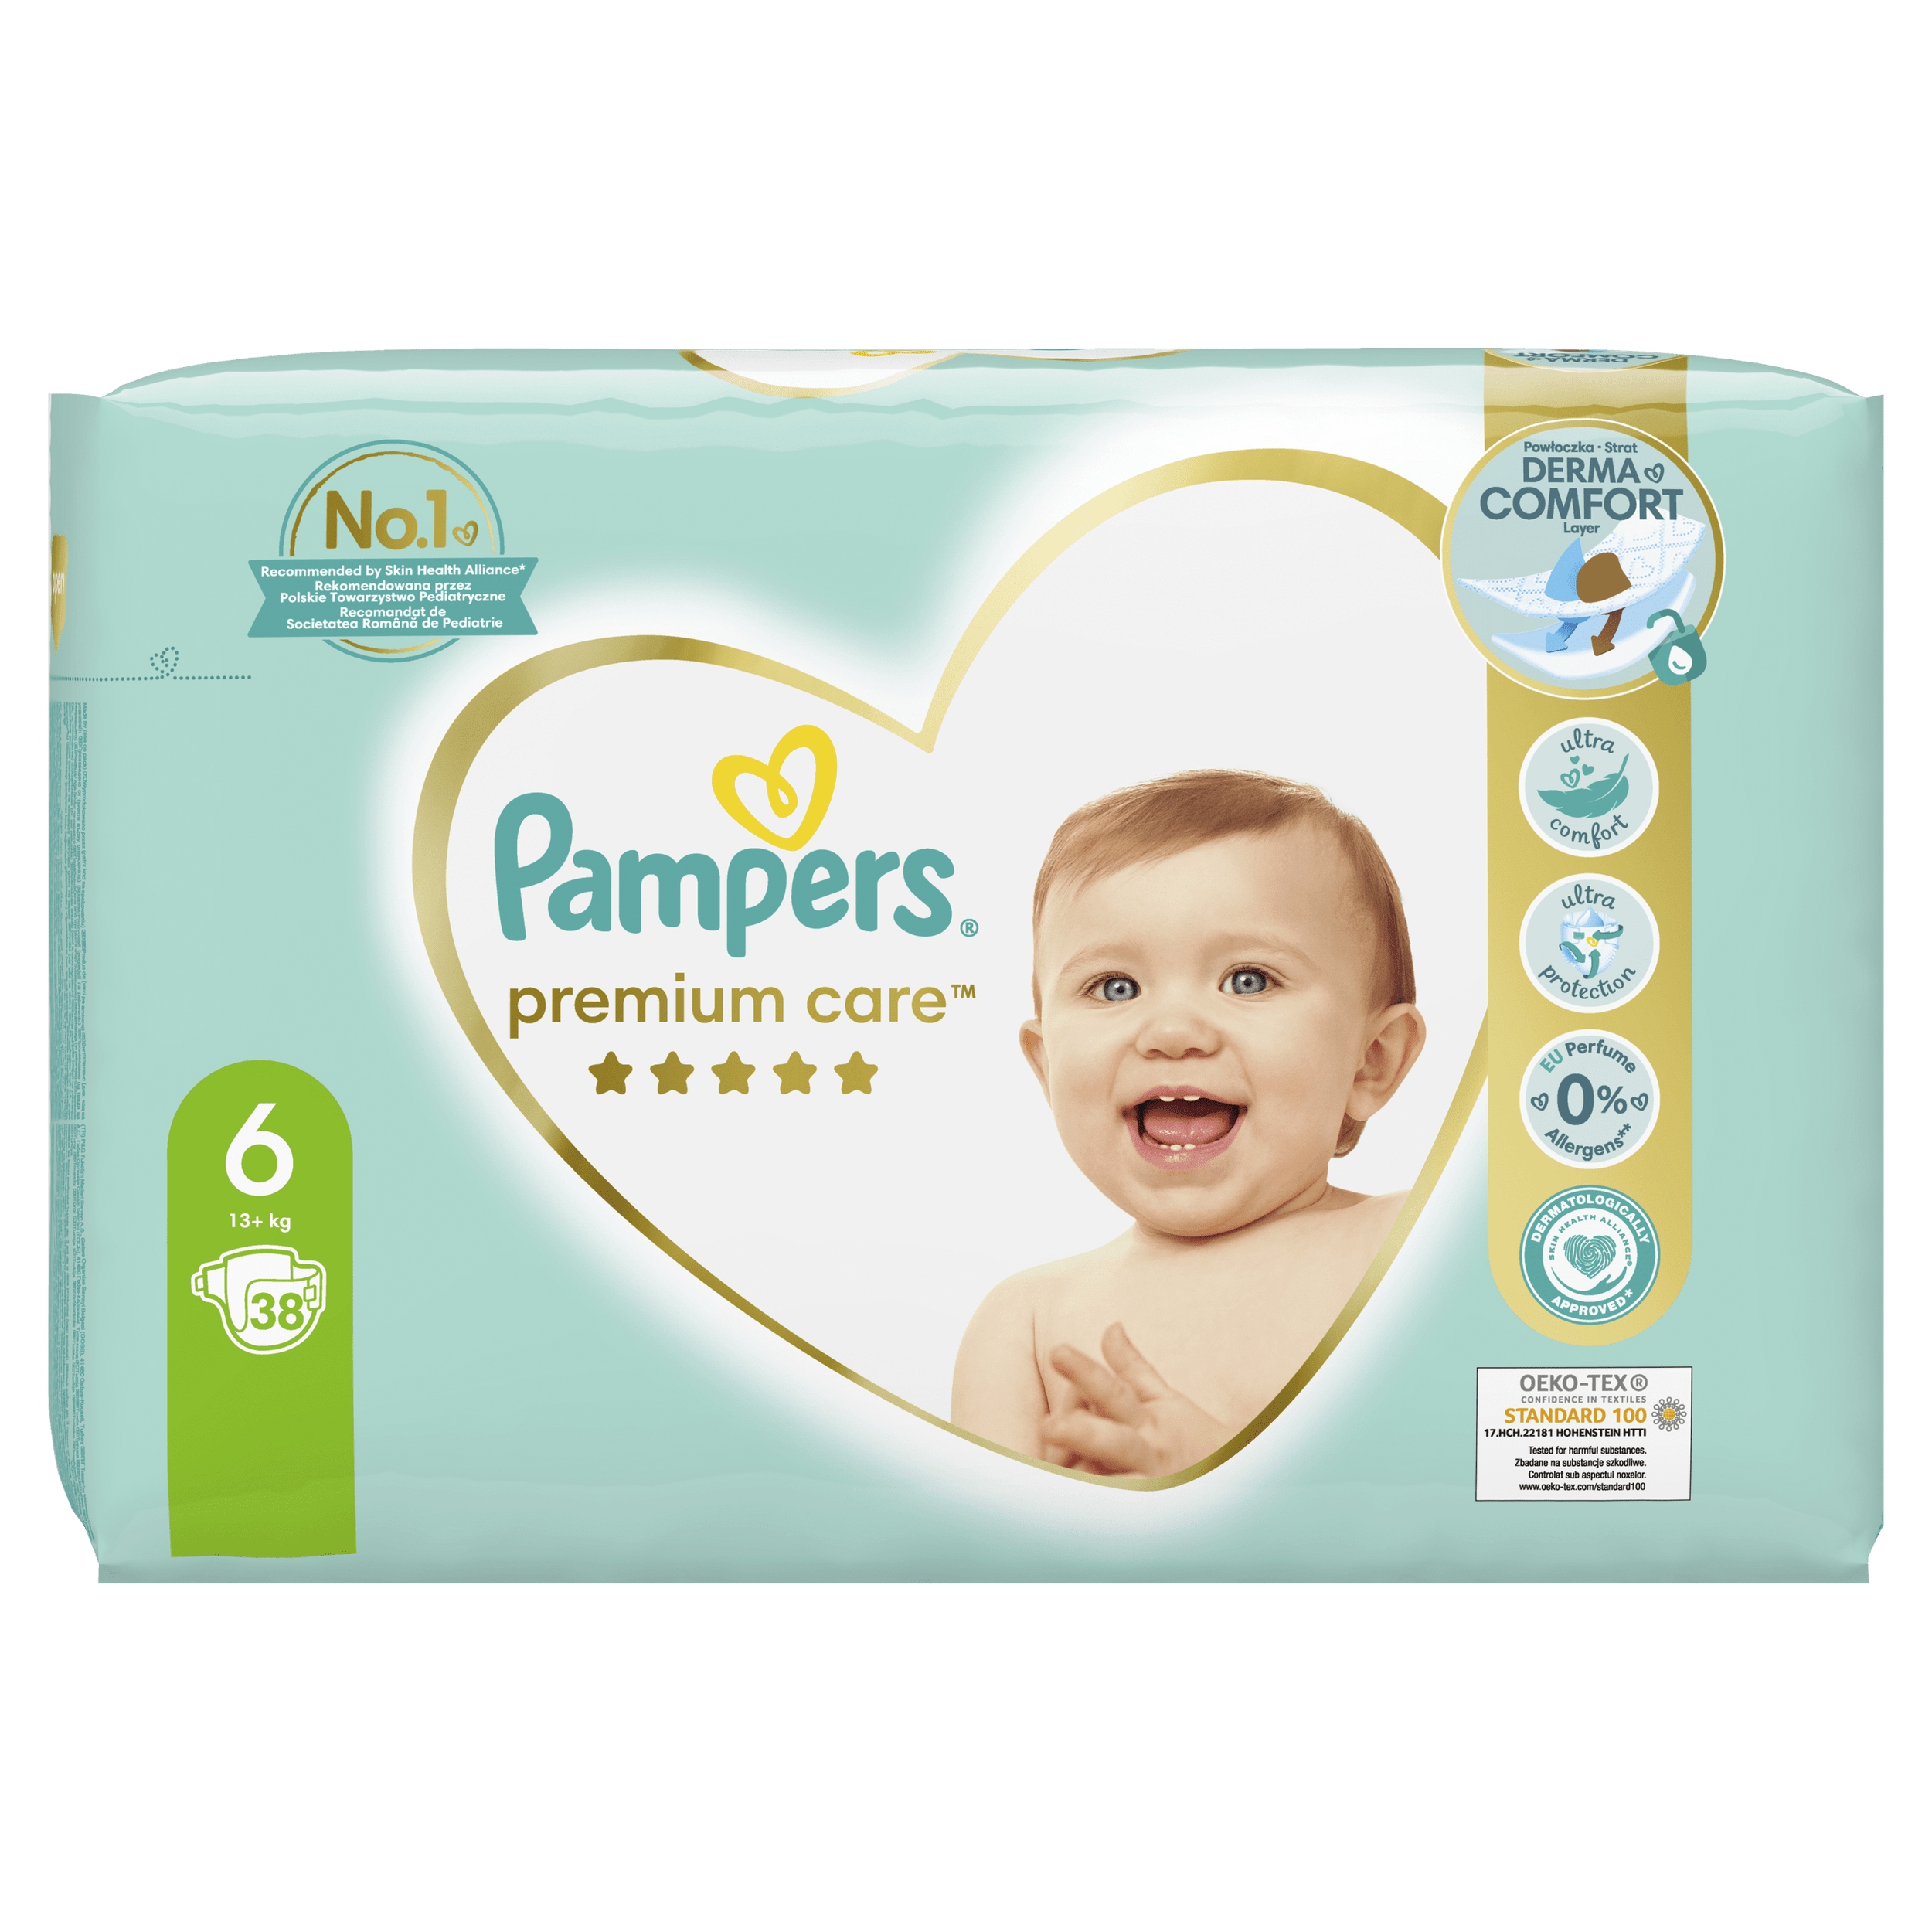 pampers casting 2019